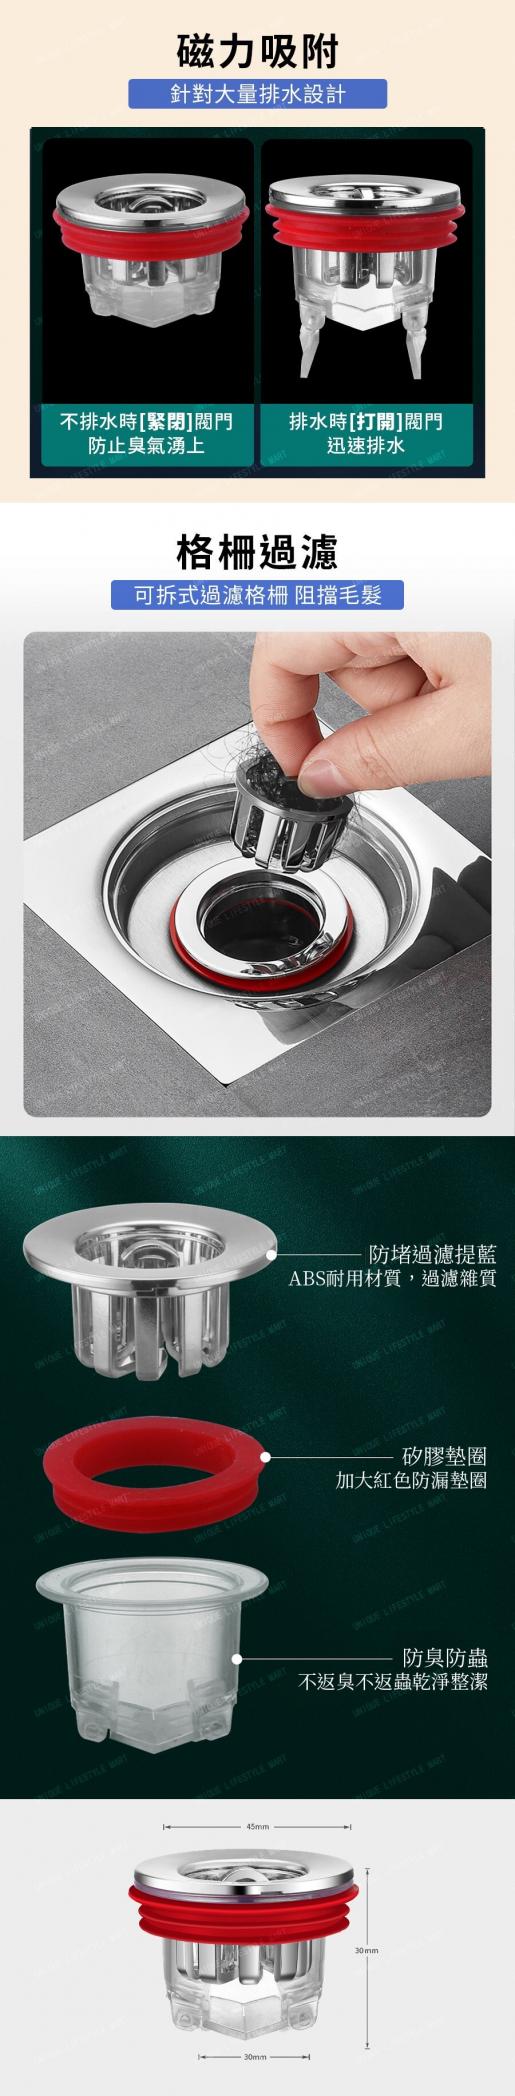 Magnetic Suction Floor Drain Cover - Anti-odor Device For Toilet